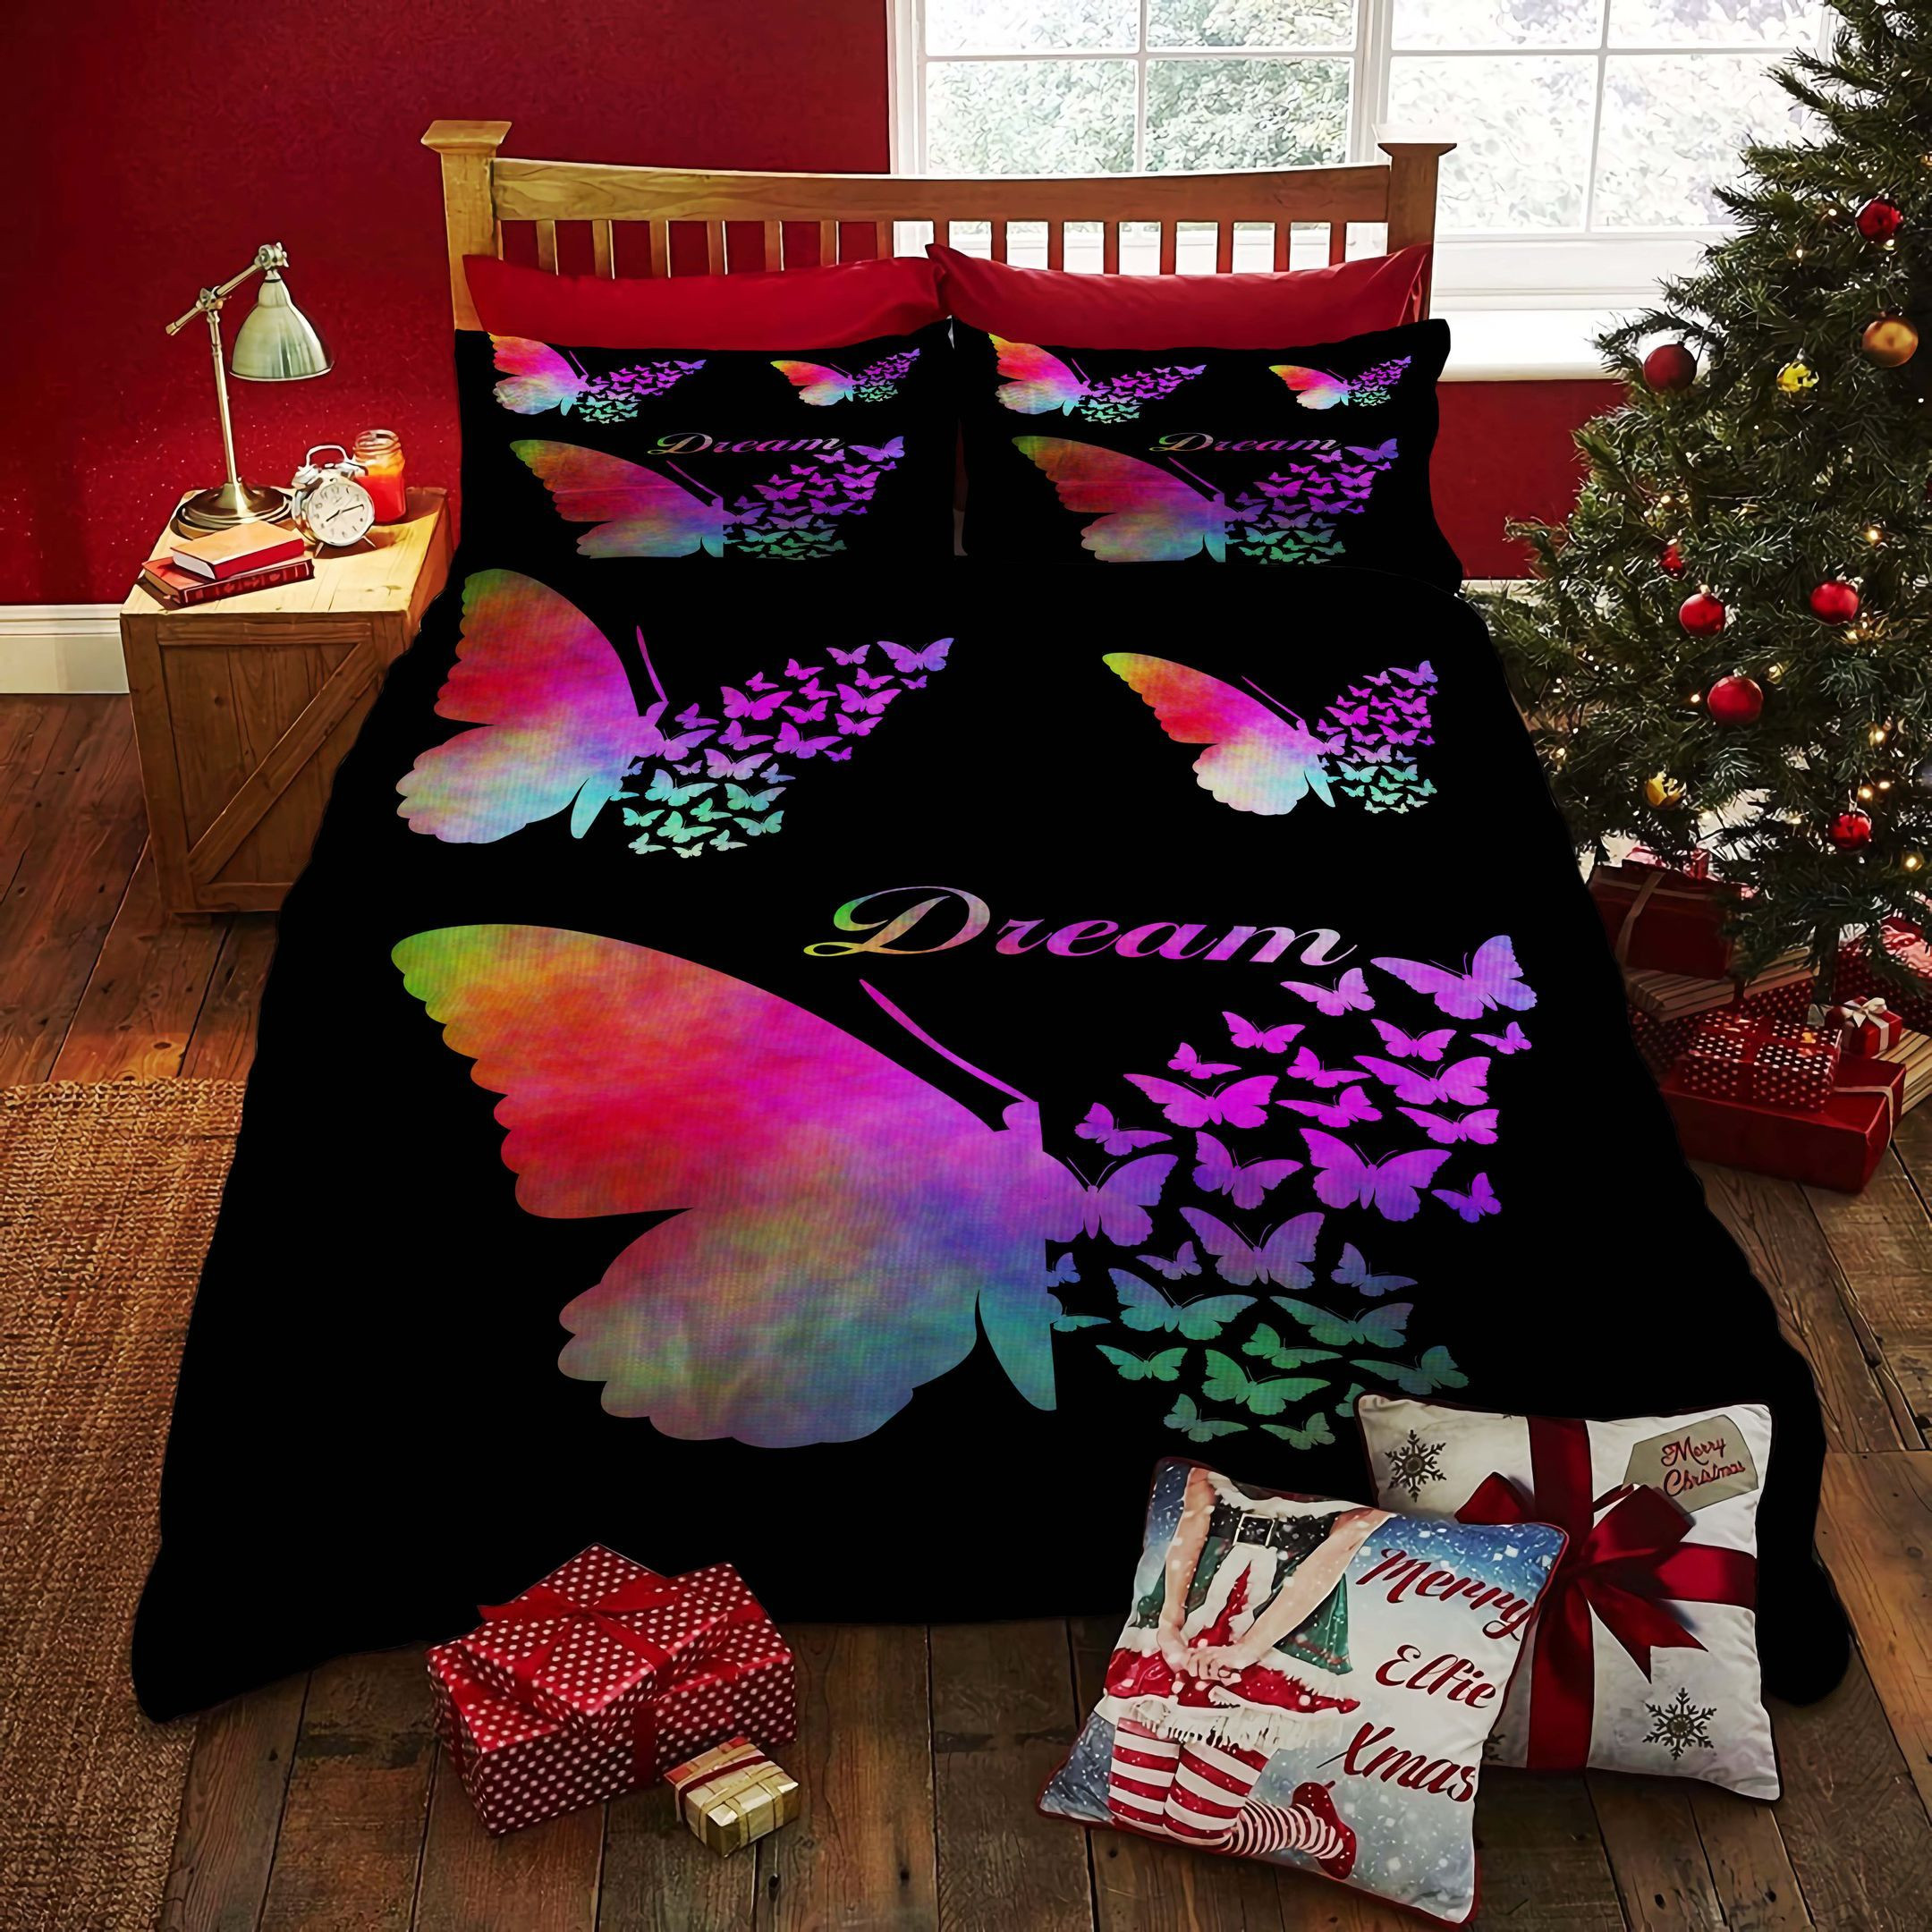 dream butterfly bed sheets duvet cover bedding set ideal presents for birthday christmas thanksgiving xlydt